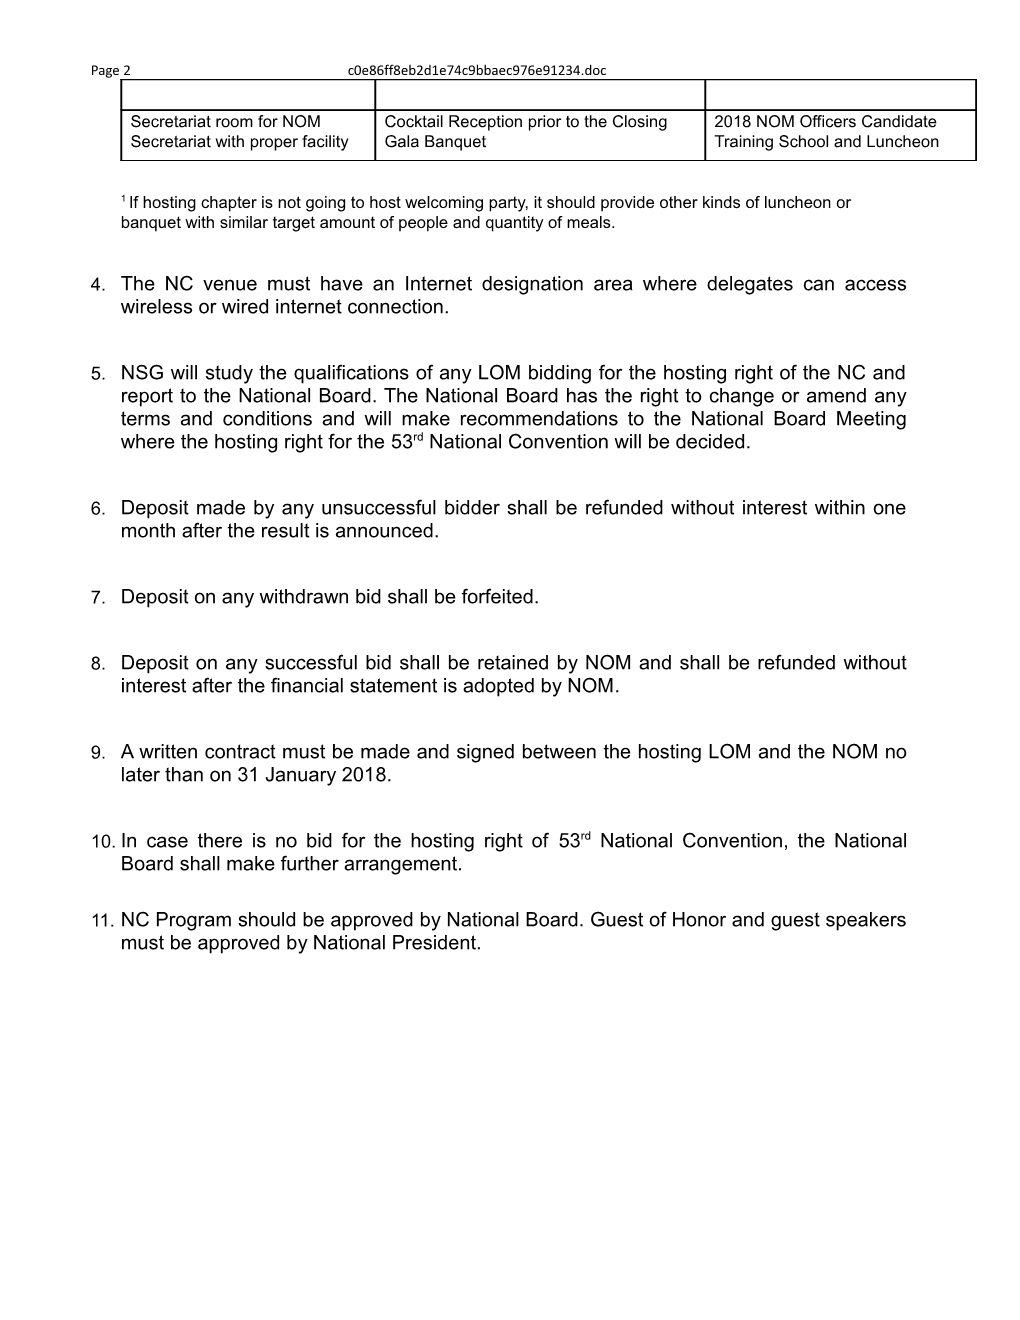 Page 1 53Rd National Convention Bid Form and Criteria